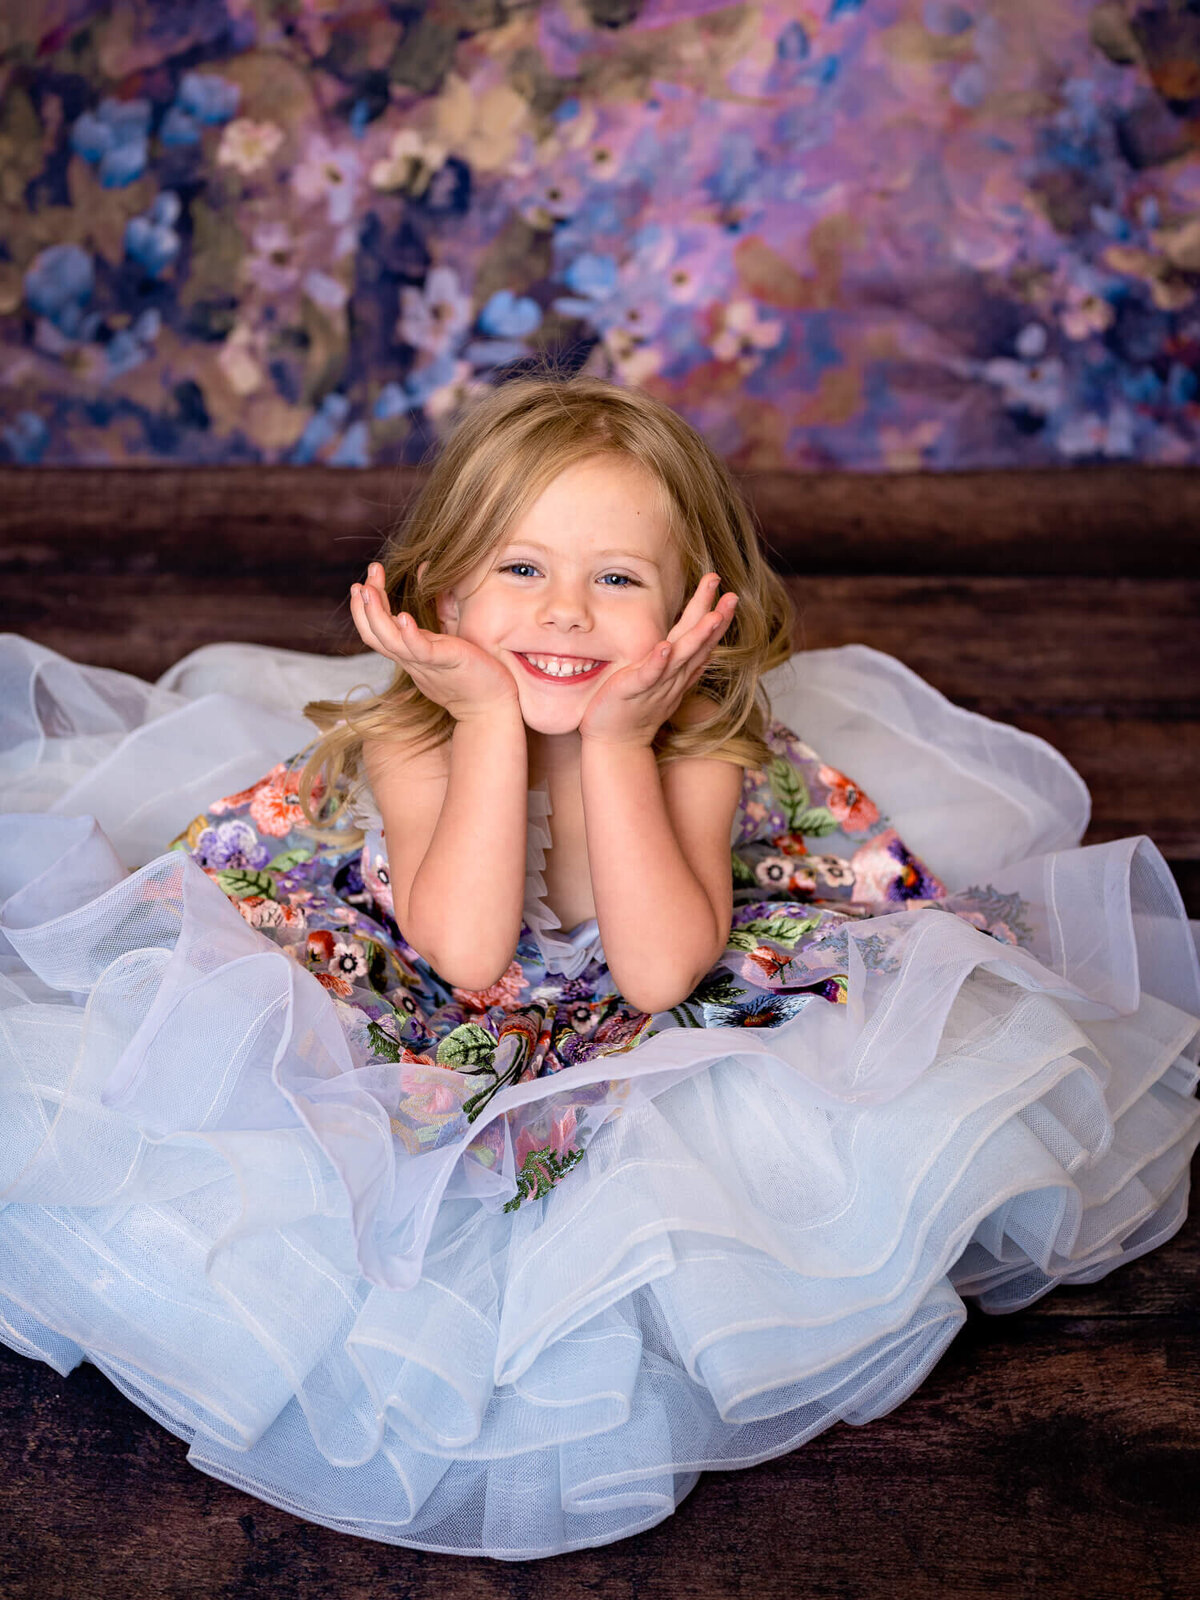 Young girl smiles in dream dress session by Prescott kids photographer Melissa Byrne